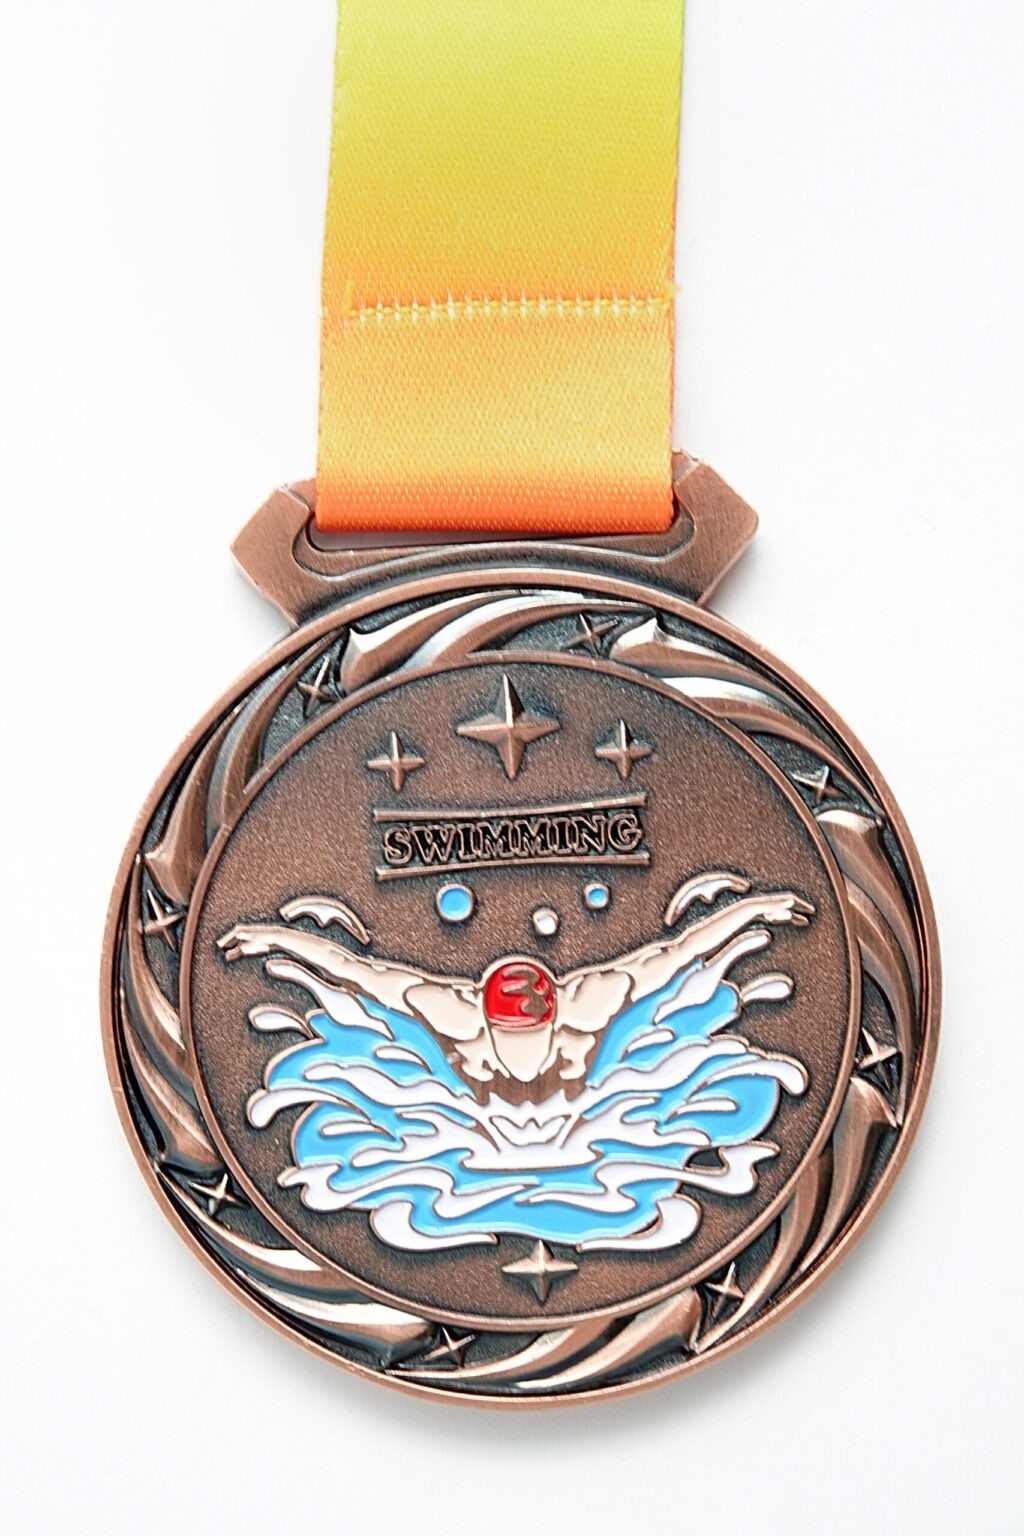 Médaille frontale "Swimming"